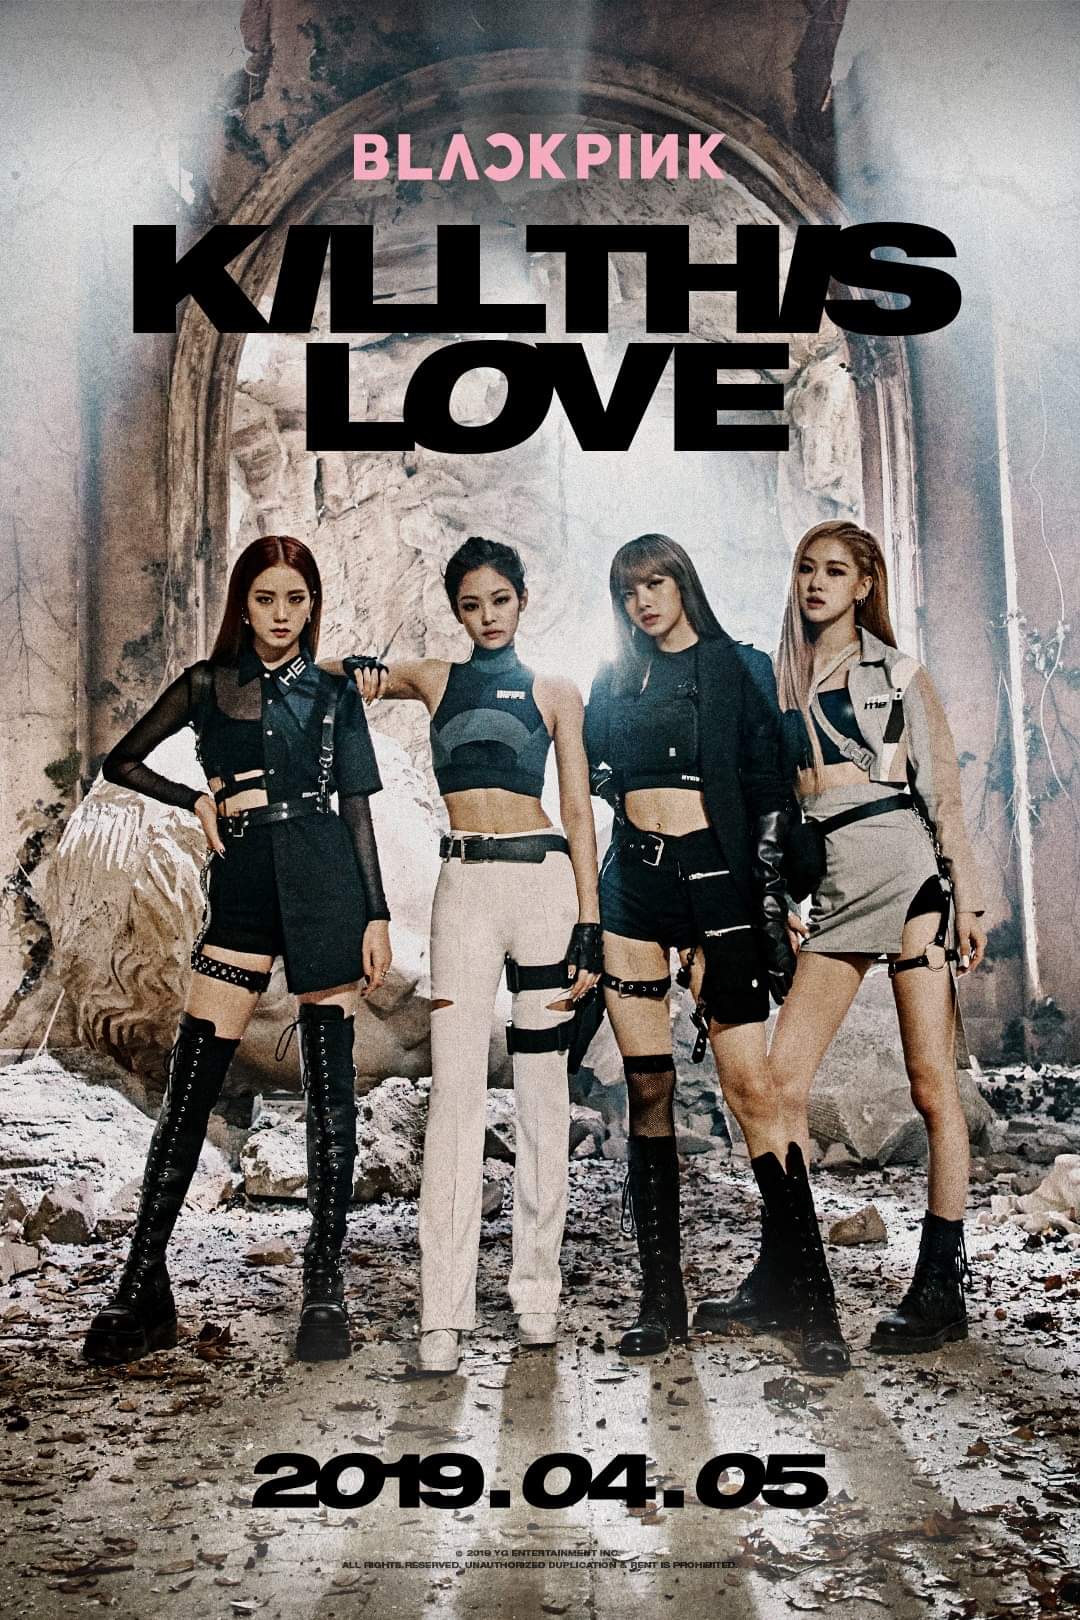 BLACKPINK This Love Poster Pink Photo 42718828